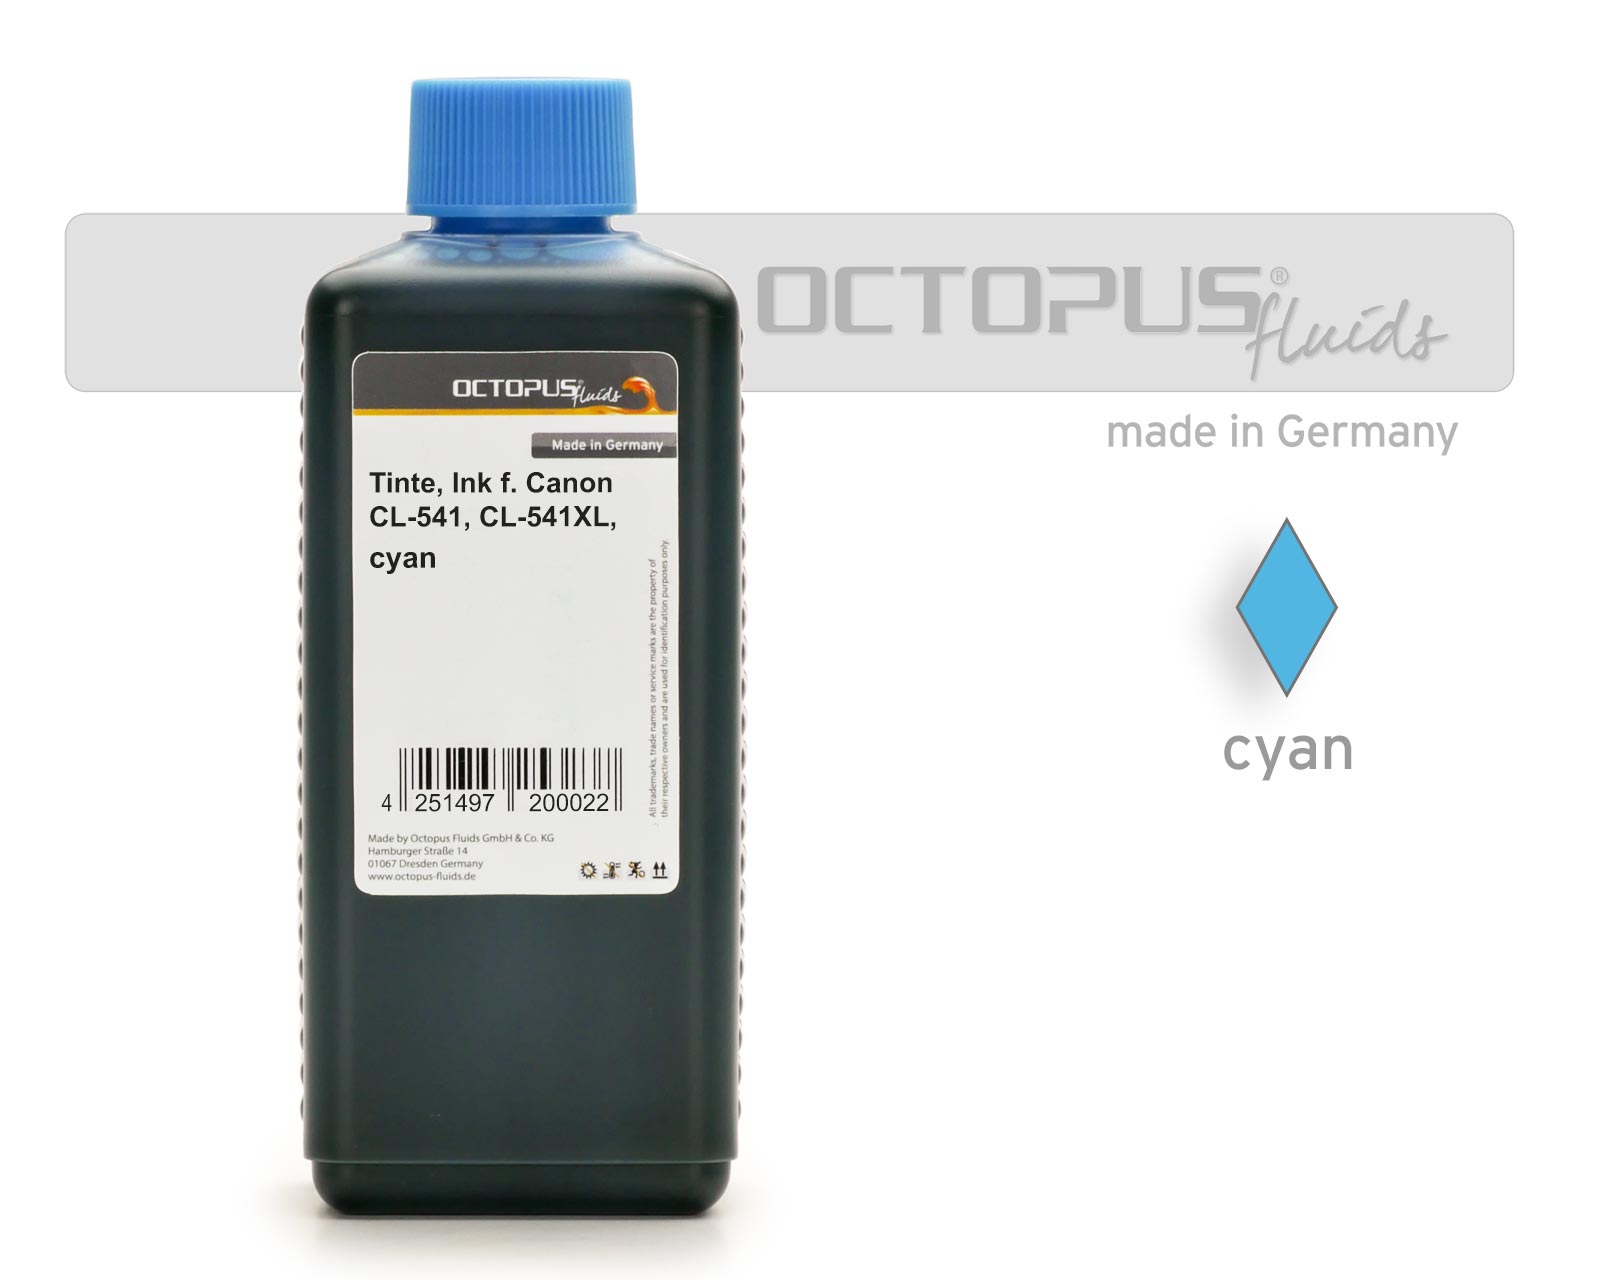 Octopus Ink for Canon CL-541, CL-541XL cyan